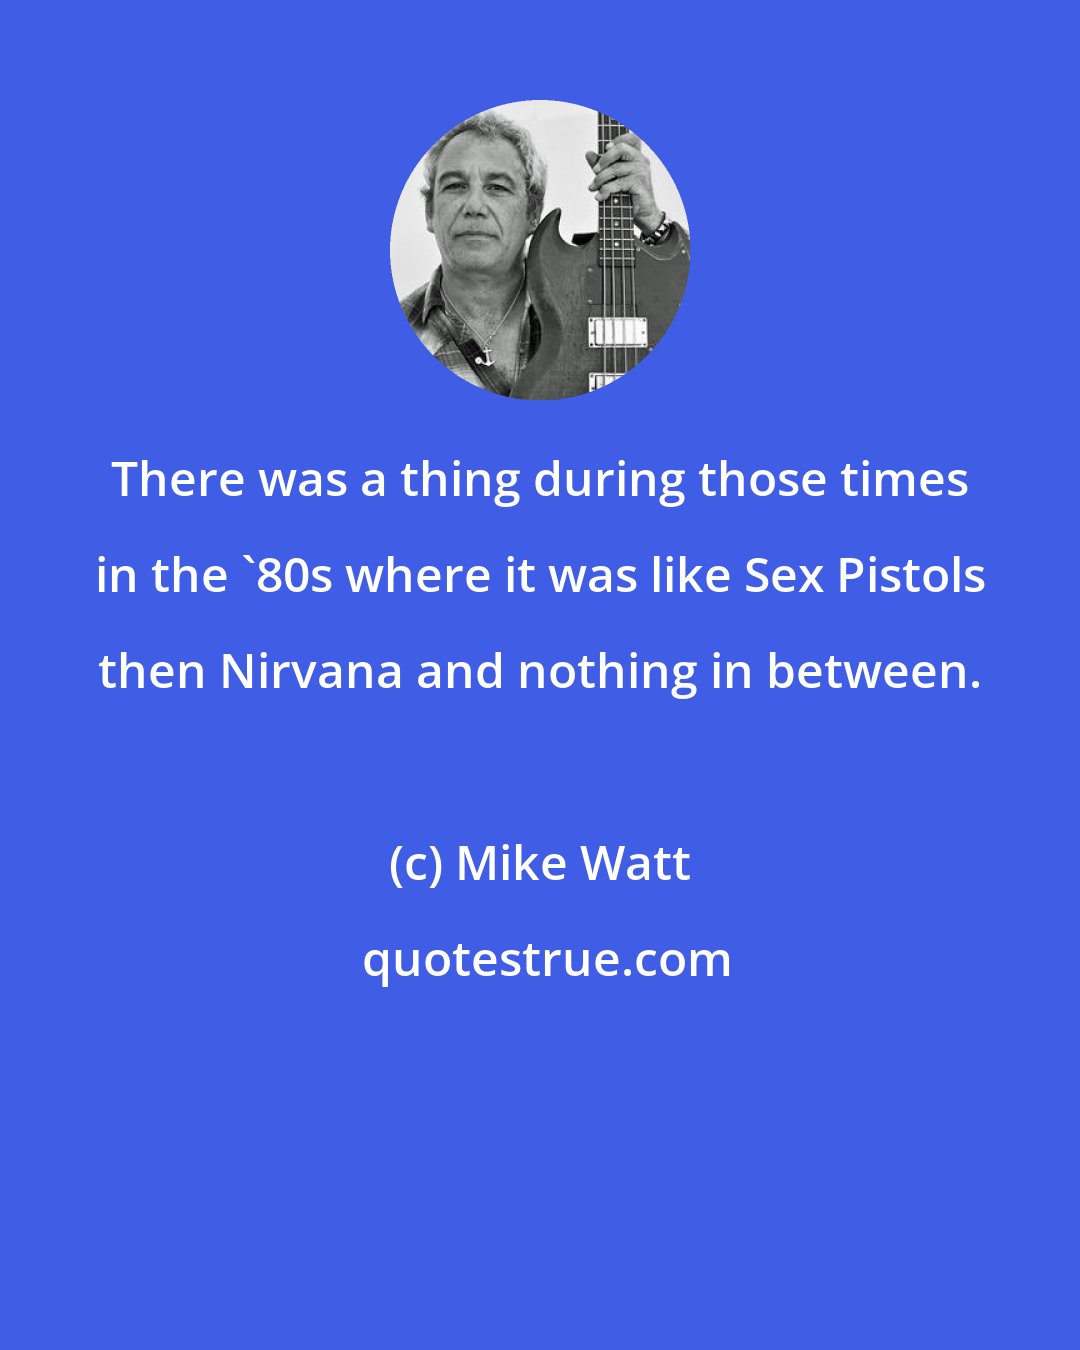 Mike Watt: There was a thing during those times in the '80s where it was like Sex Pistols then Nirvana and nothing in between.